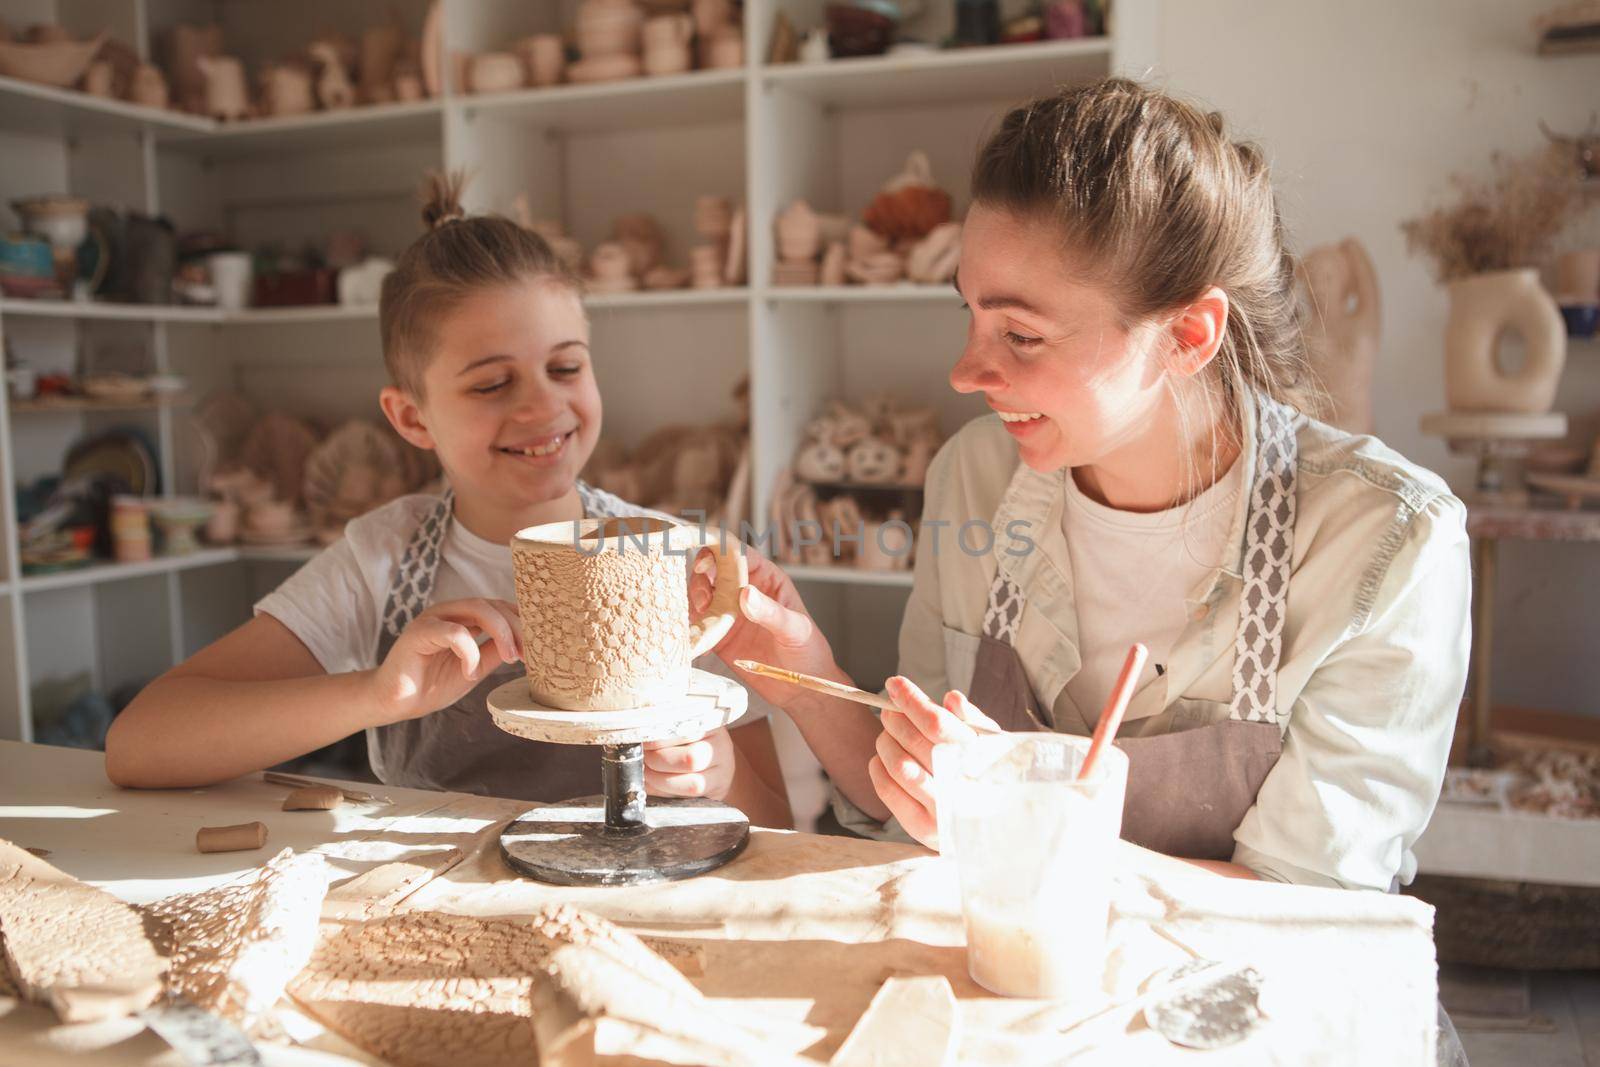 Young boy laughing with his mom while making tableware together at pottery studio